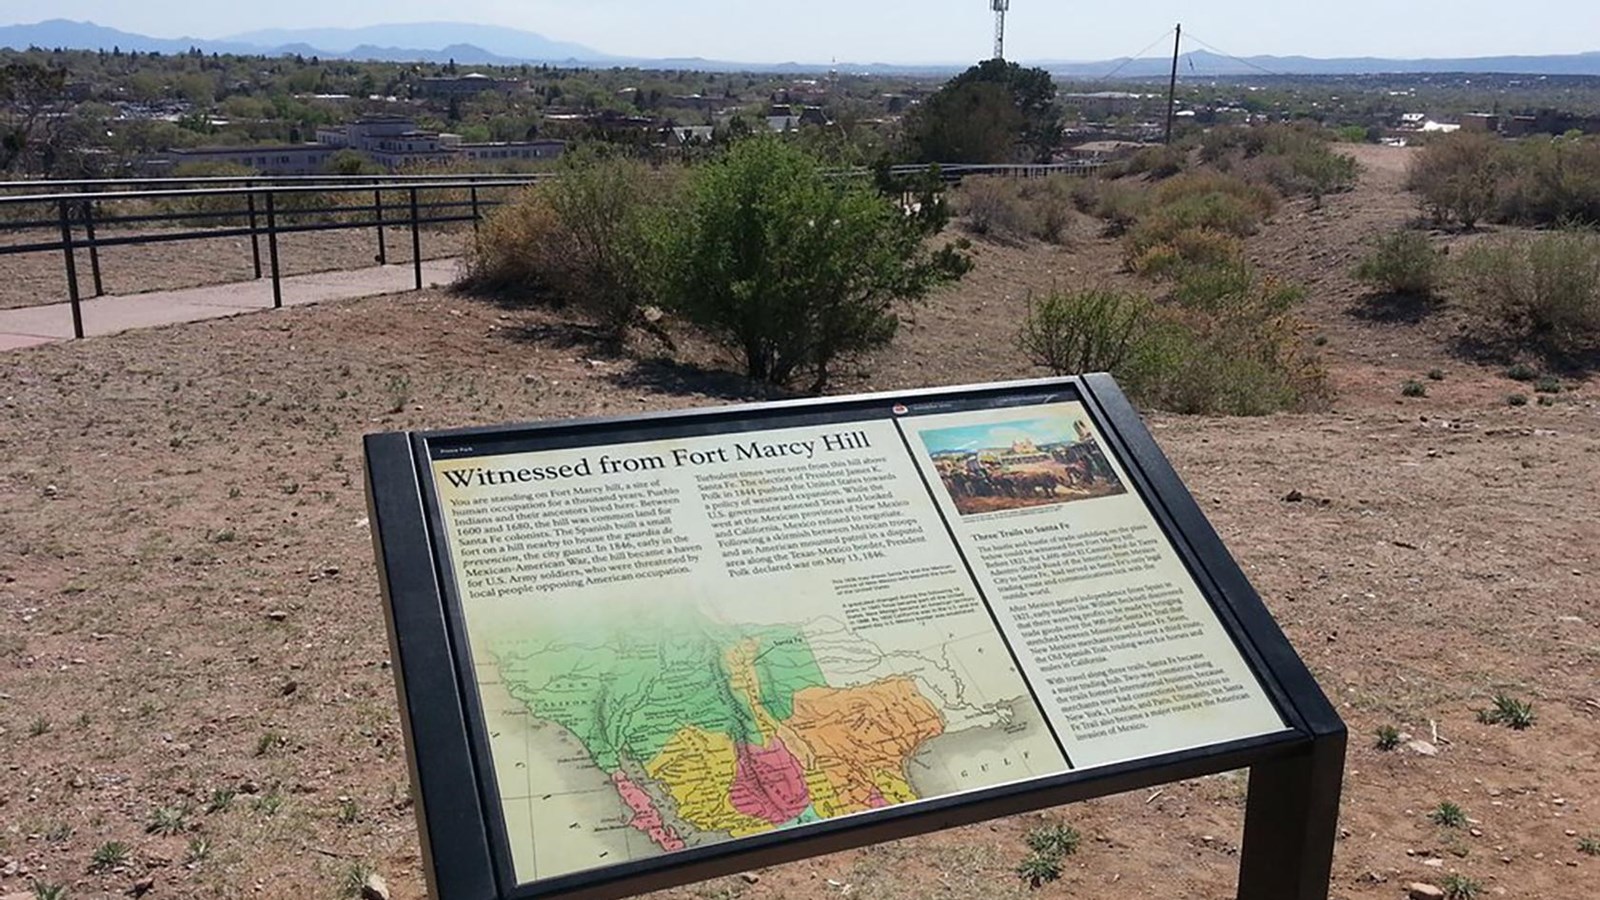 A wayside exhibit looking out towards a ruin of an adobe wall, on a bluff overlooking a city.